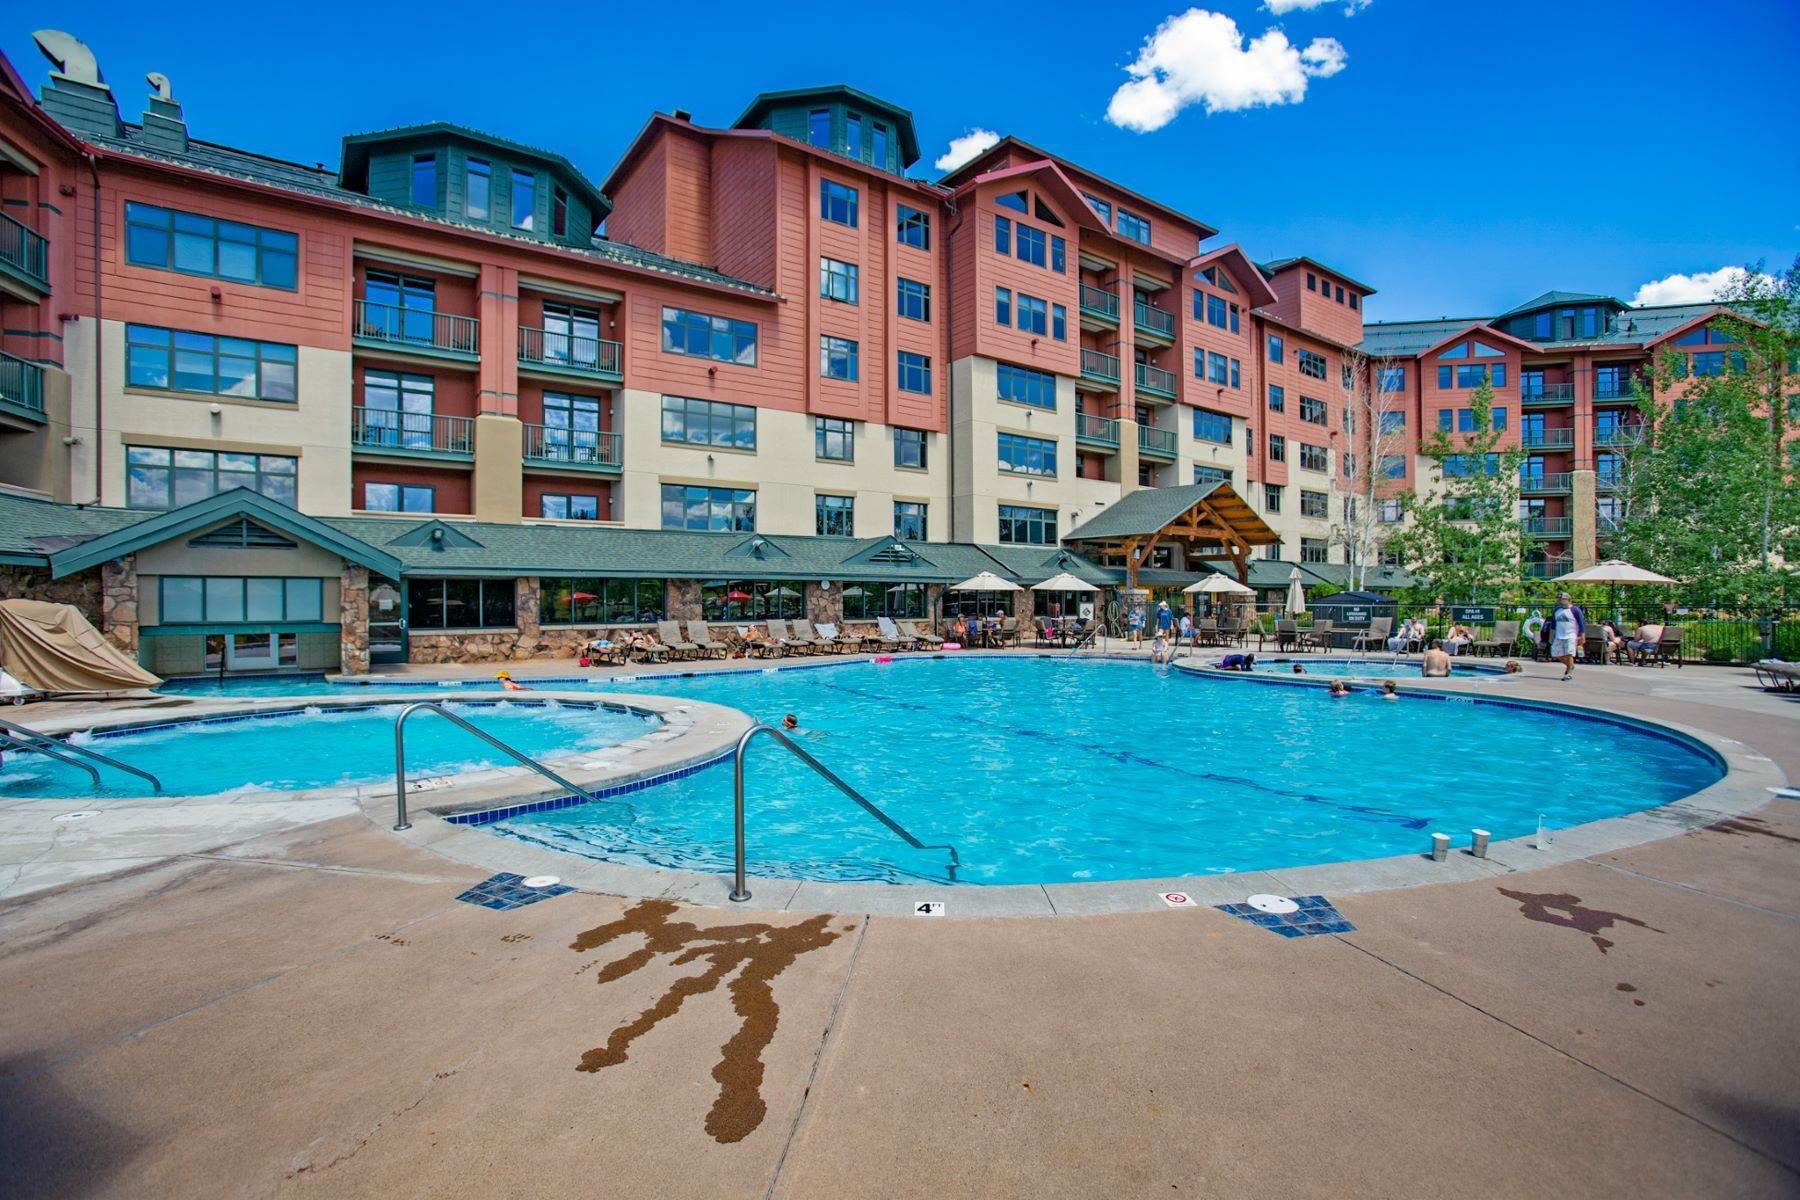 Fractional Ownership Property for Sale at Quarter Share at The Grand 2300 Mount Werner Circle, Unit# 330 Steamboat Springs, Colorado 80487 United States